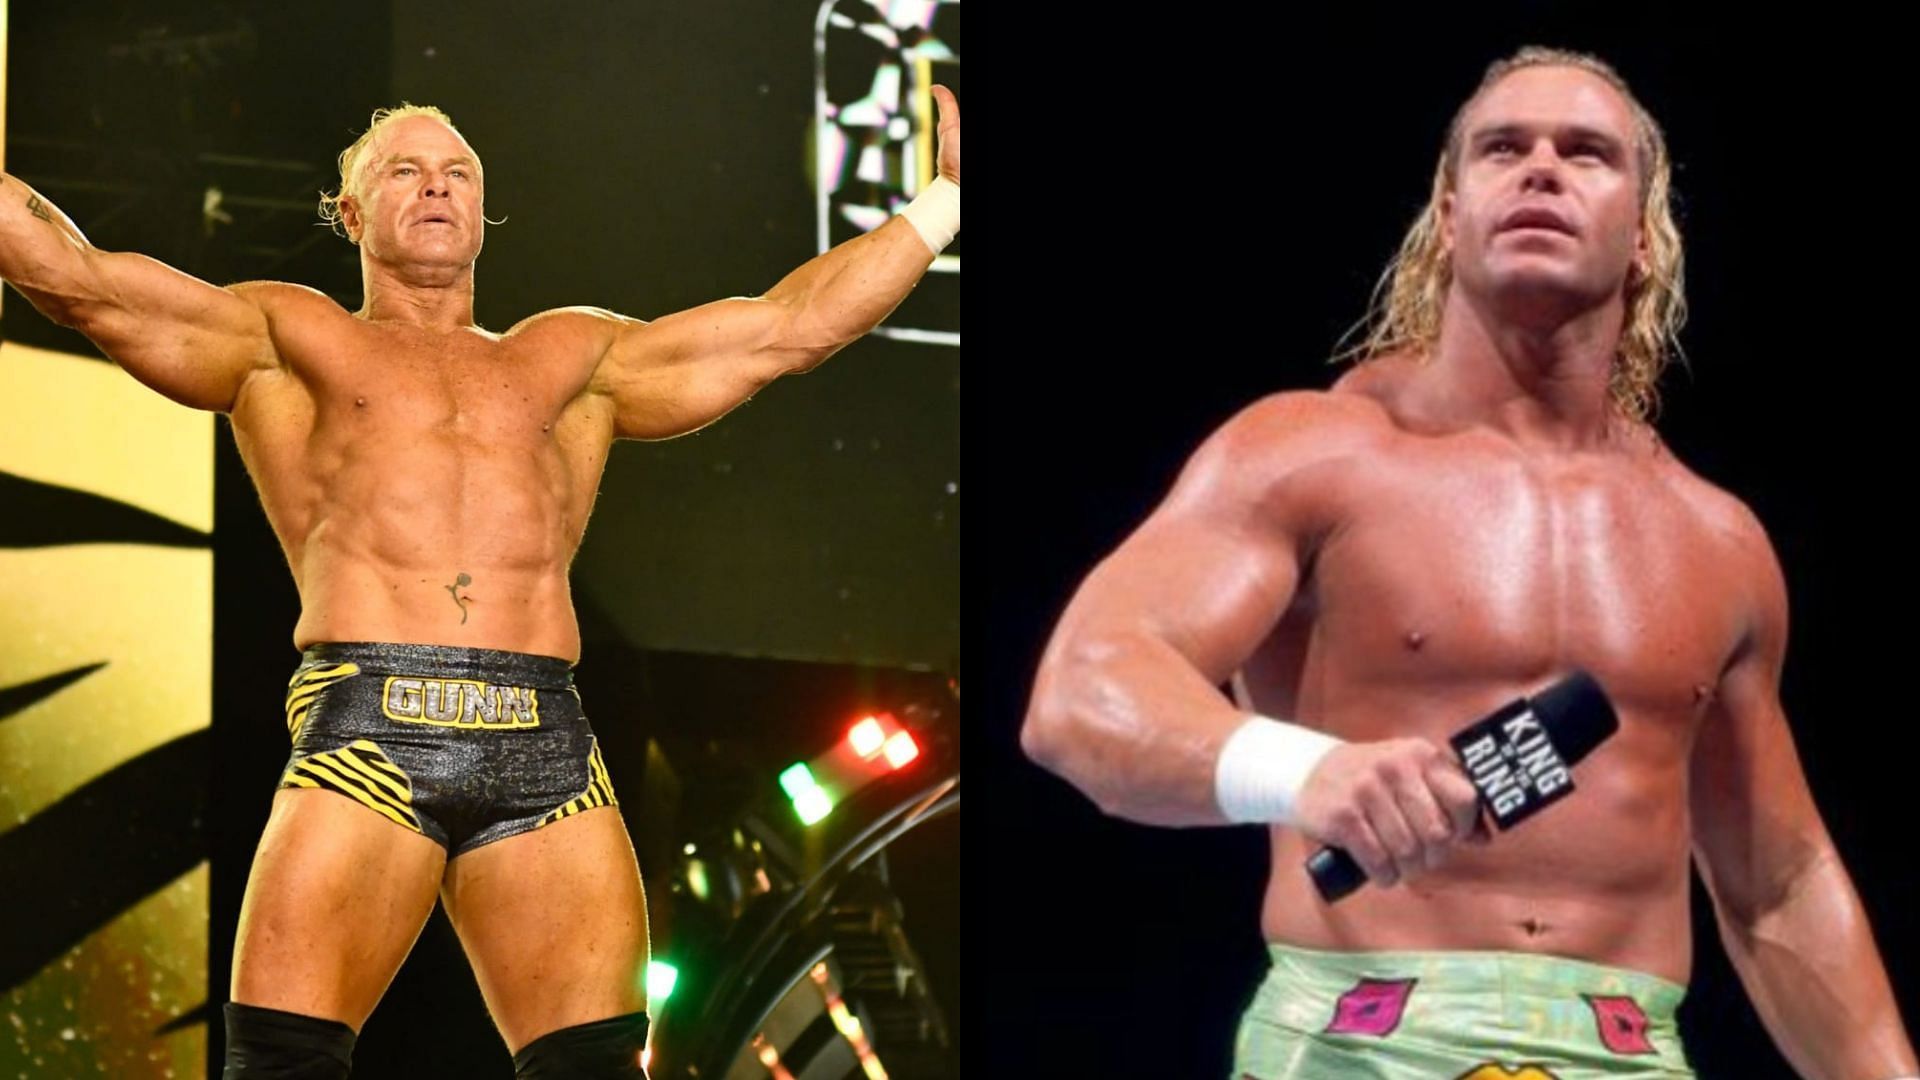 Billy Gunn is currently working closely with The Acclaimed in AEW